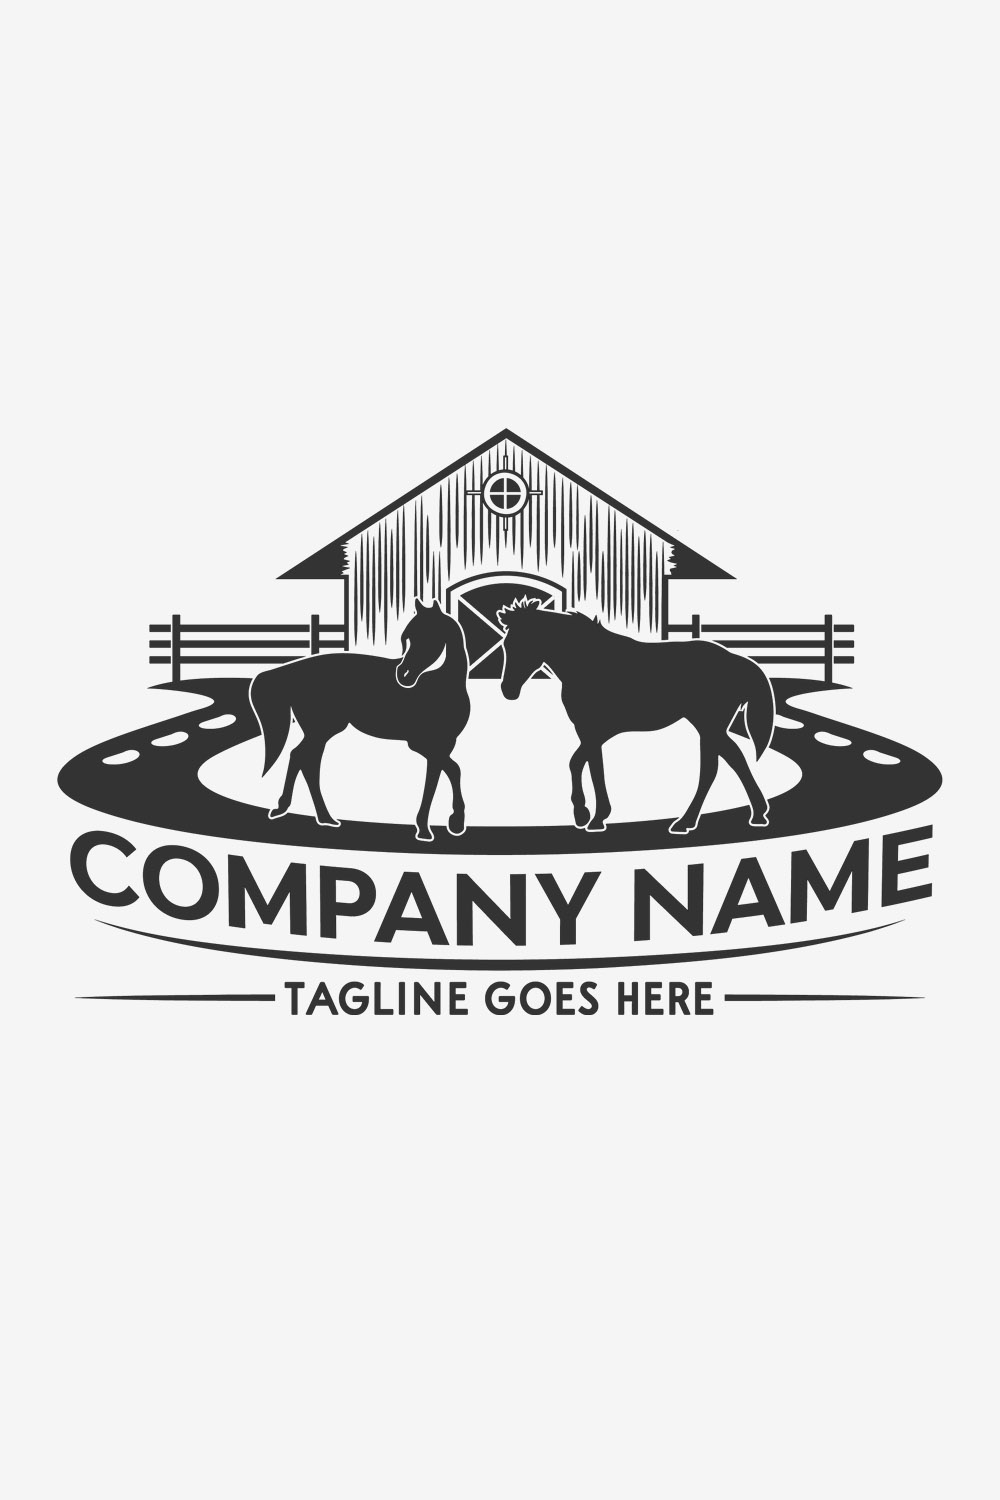 Horse Farm logo for horse Related business purpose pinterest preview image.